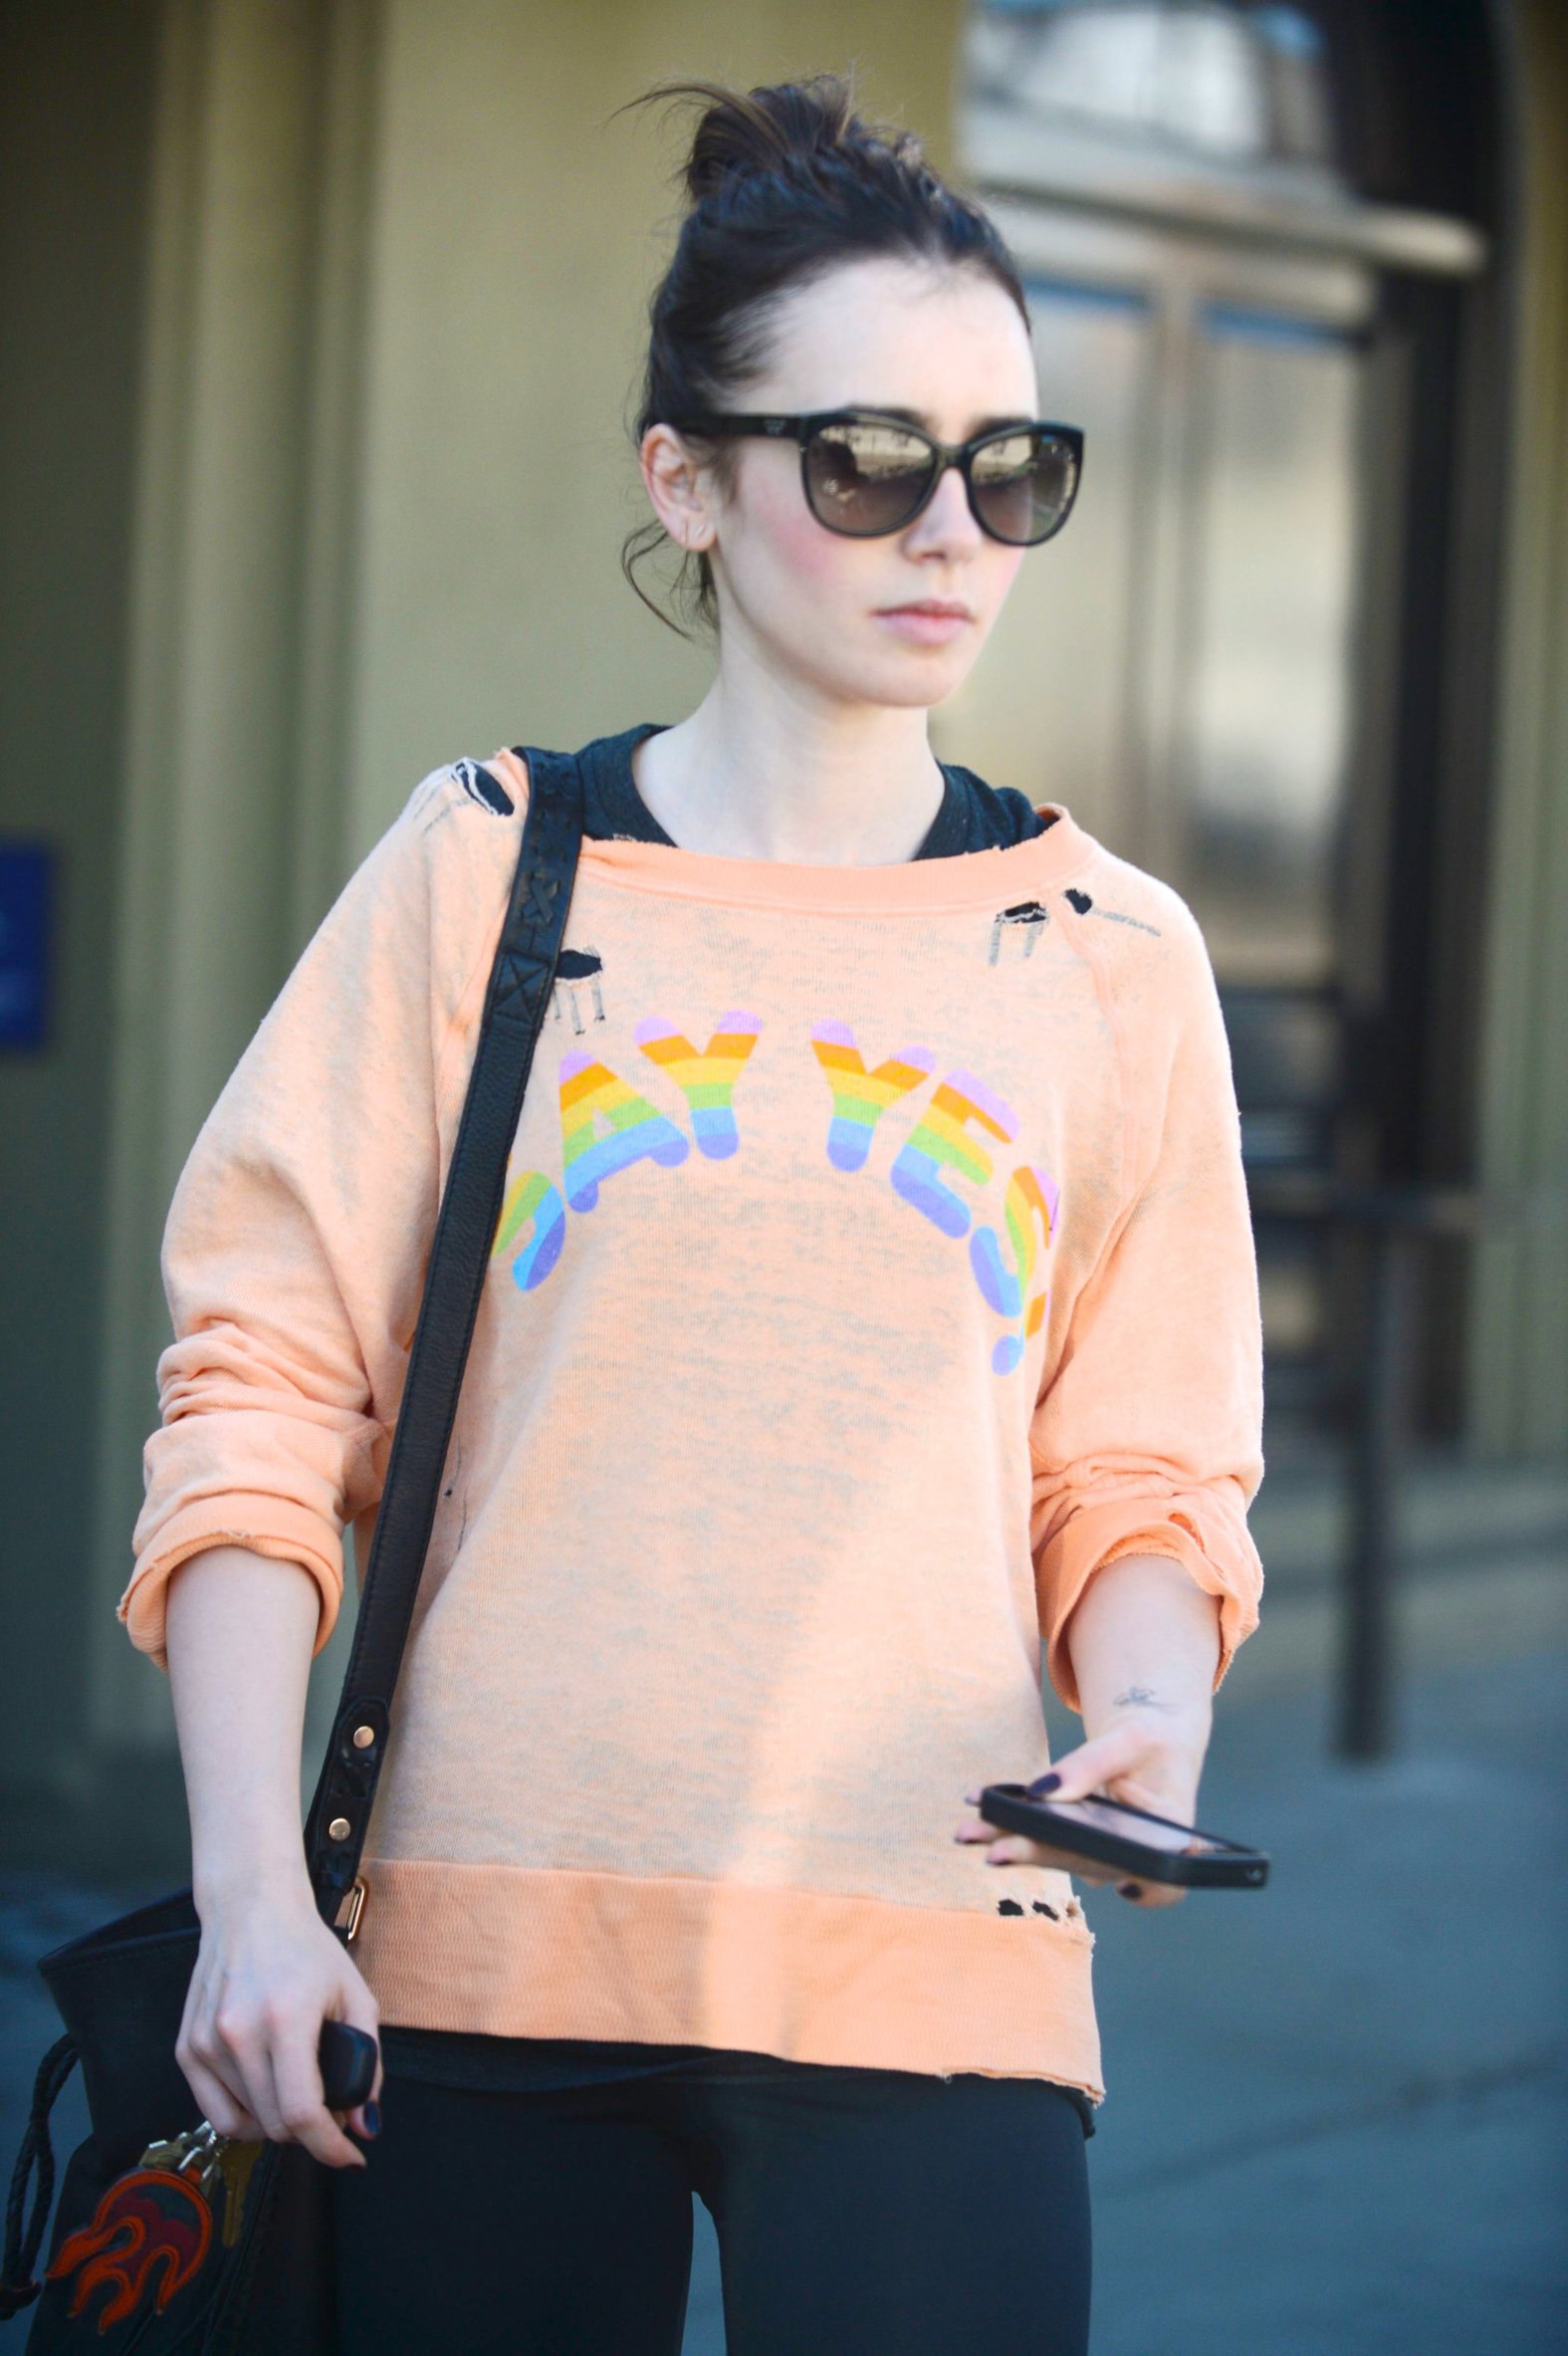 Lily Collins Pictures. 